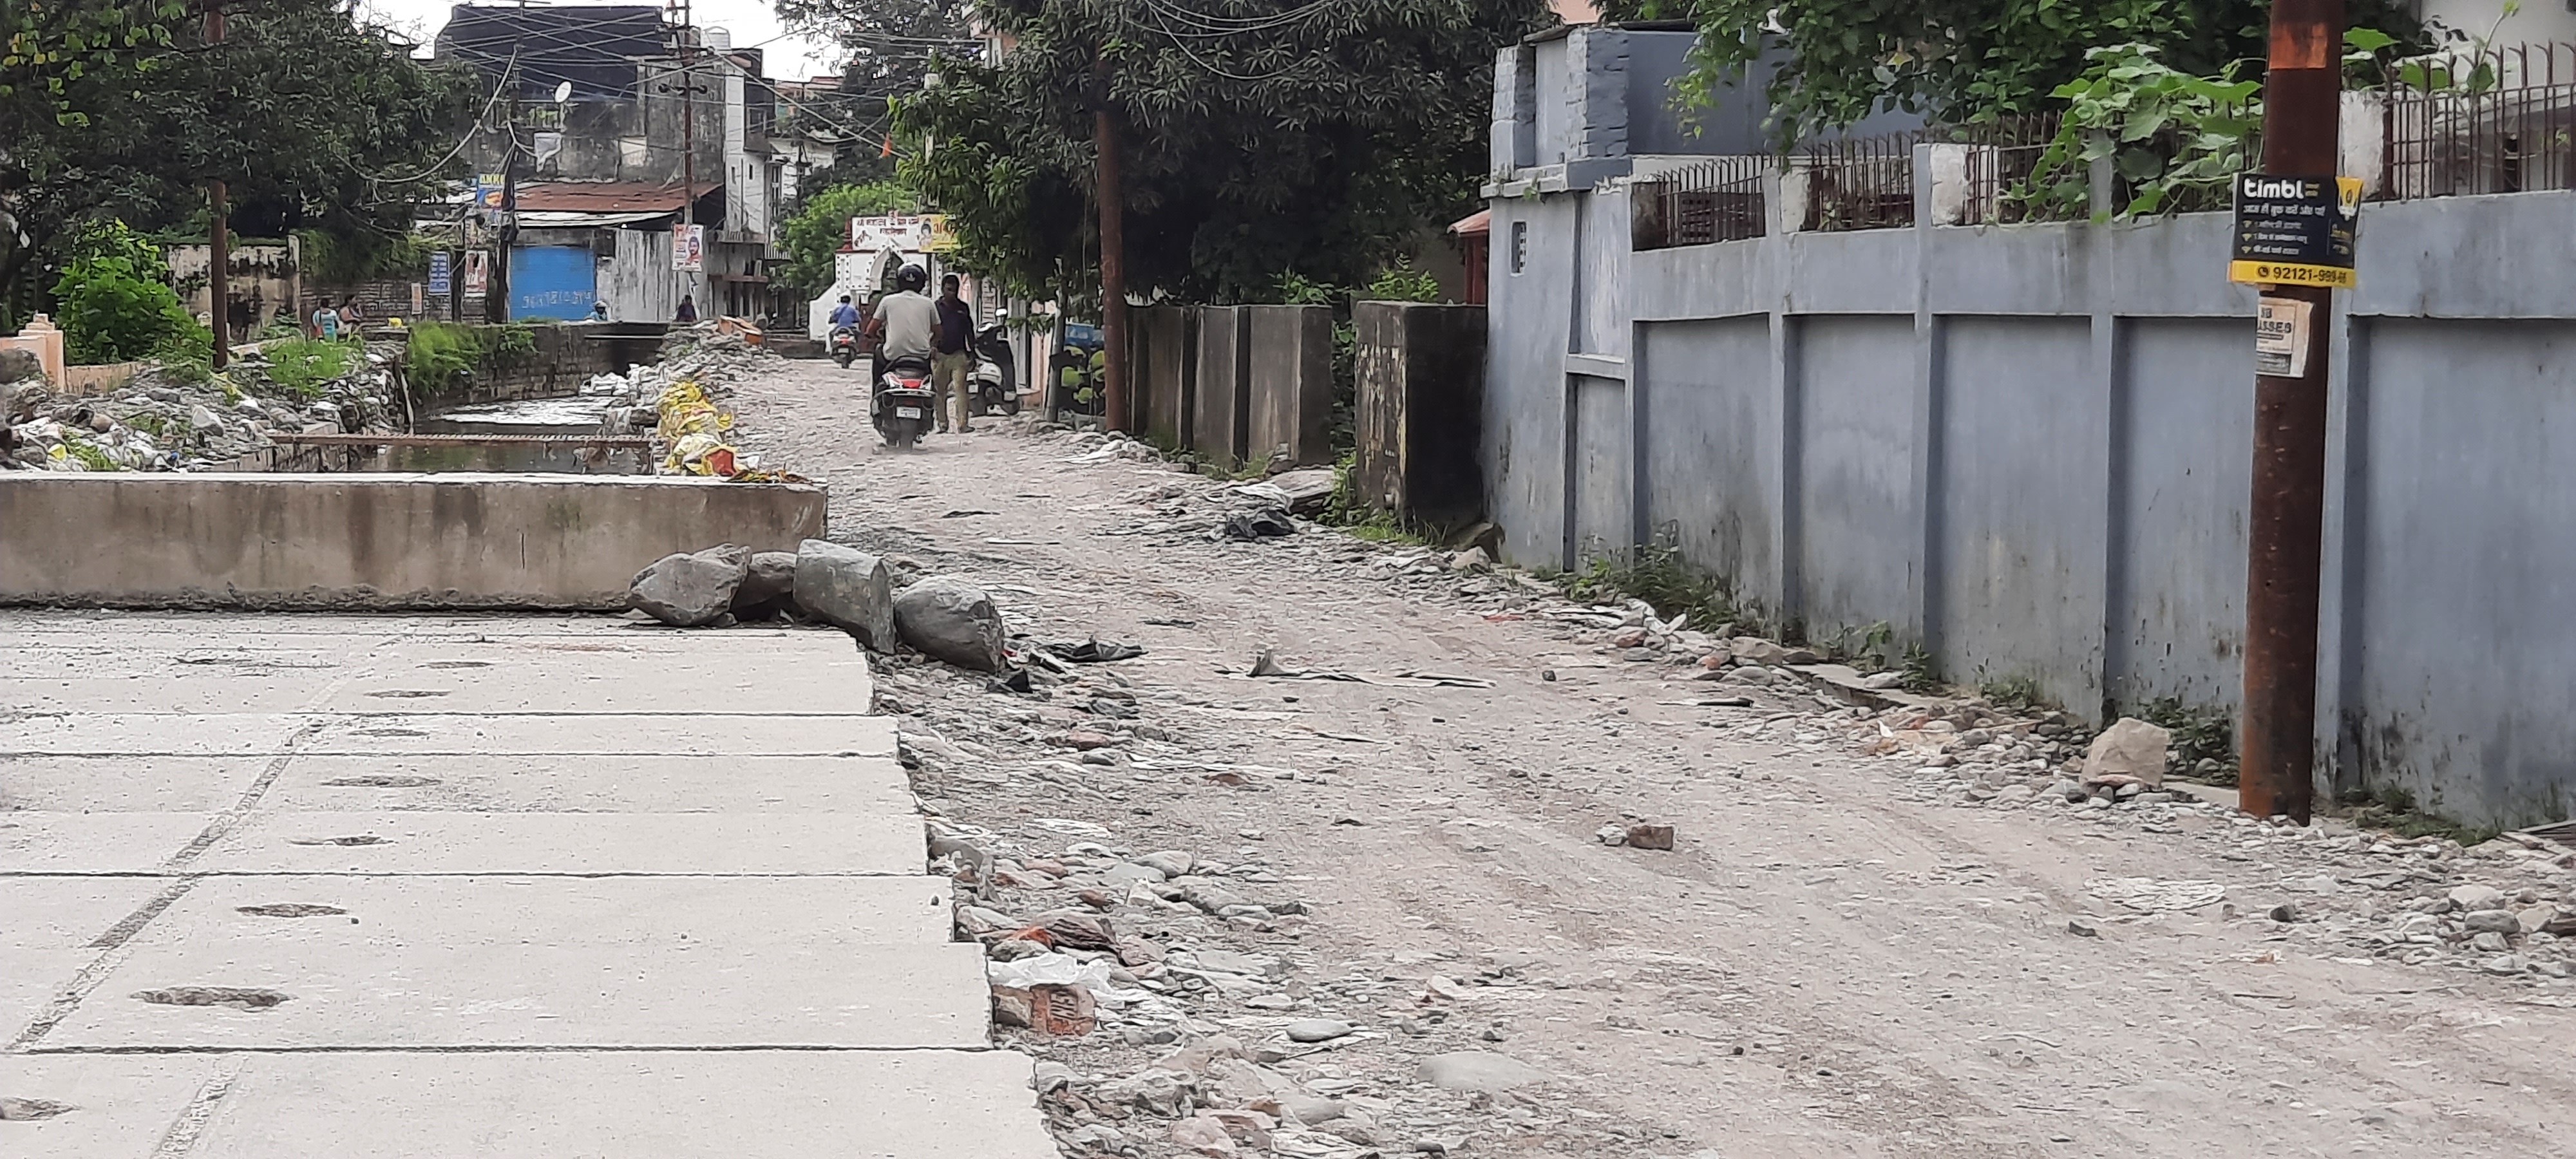 Bad condition of roads in Haldwani